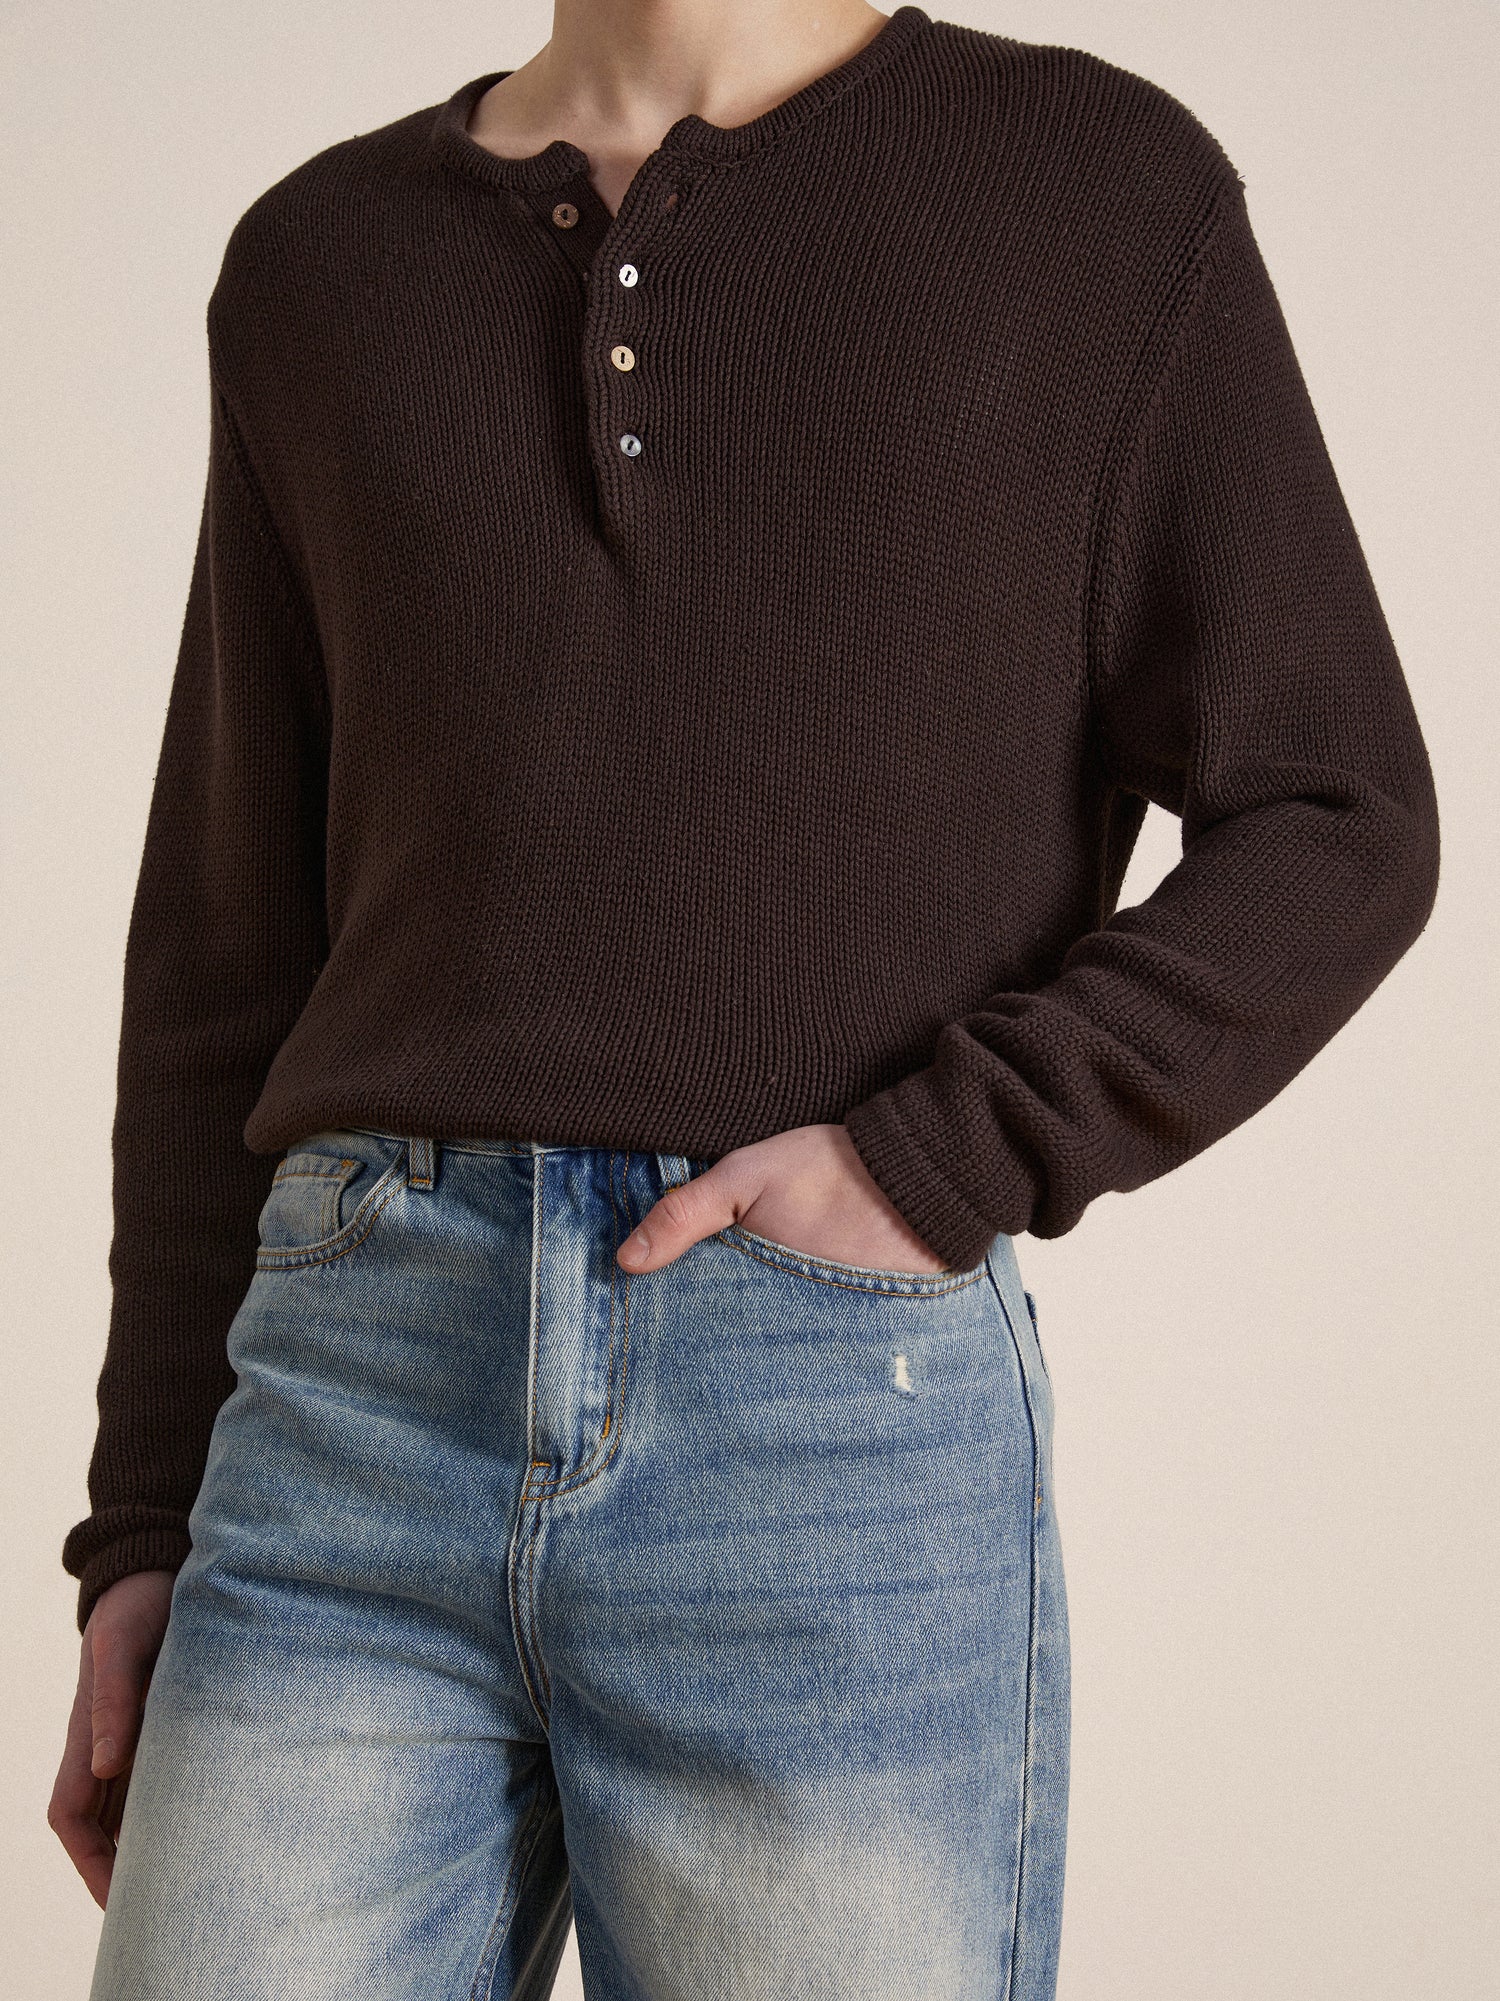 The model is wearing a Profound premium cotton Knit Henley brown sweater and jeans.